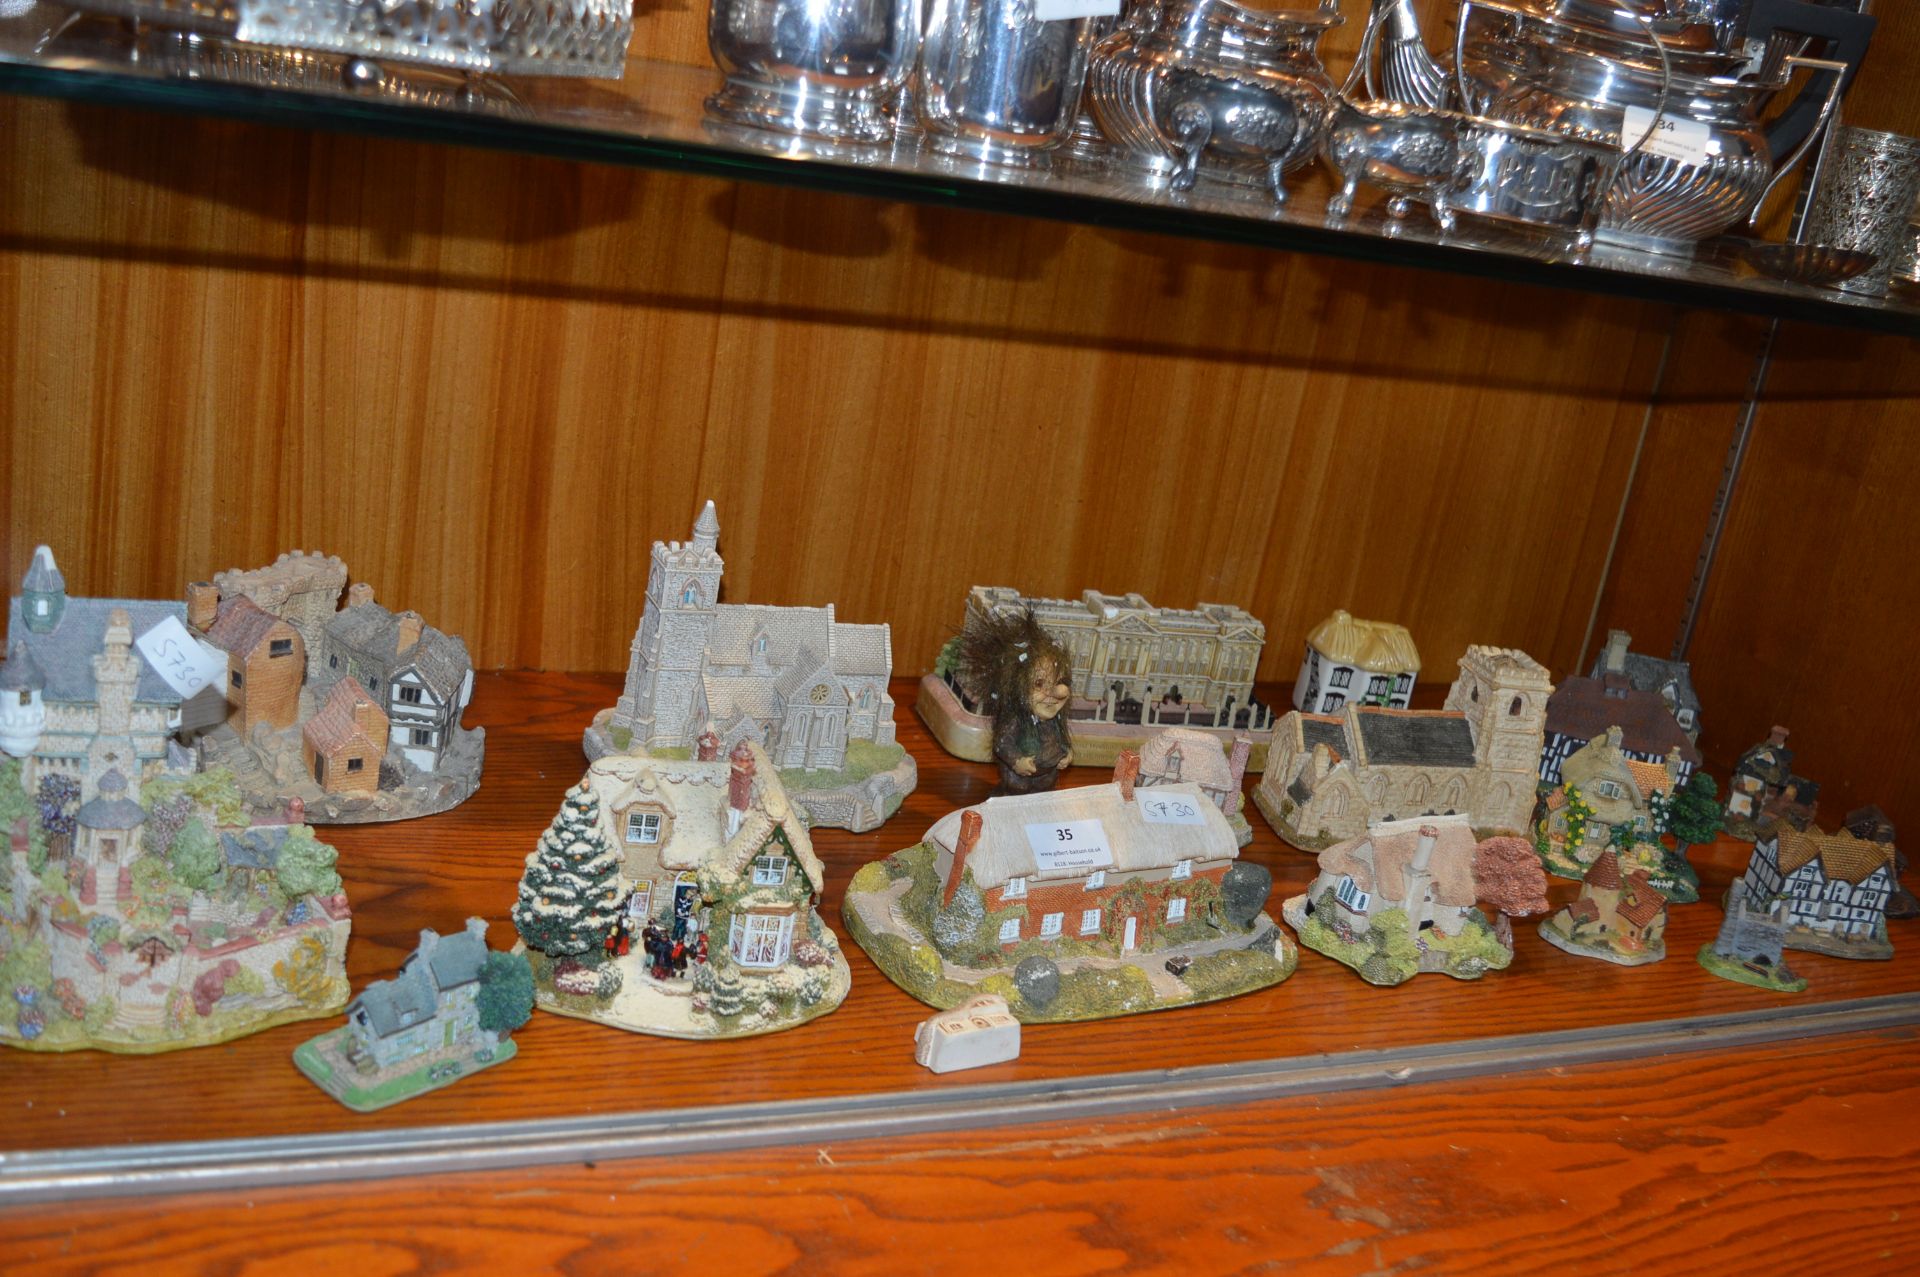 Lilliput Lane and Other Cottages, Churches, etc.